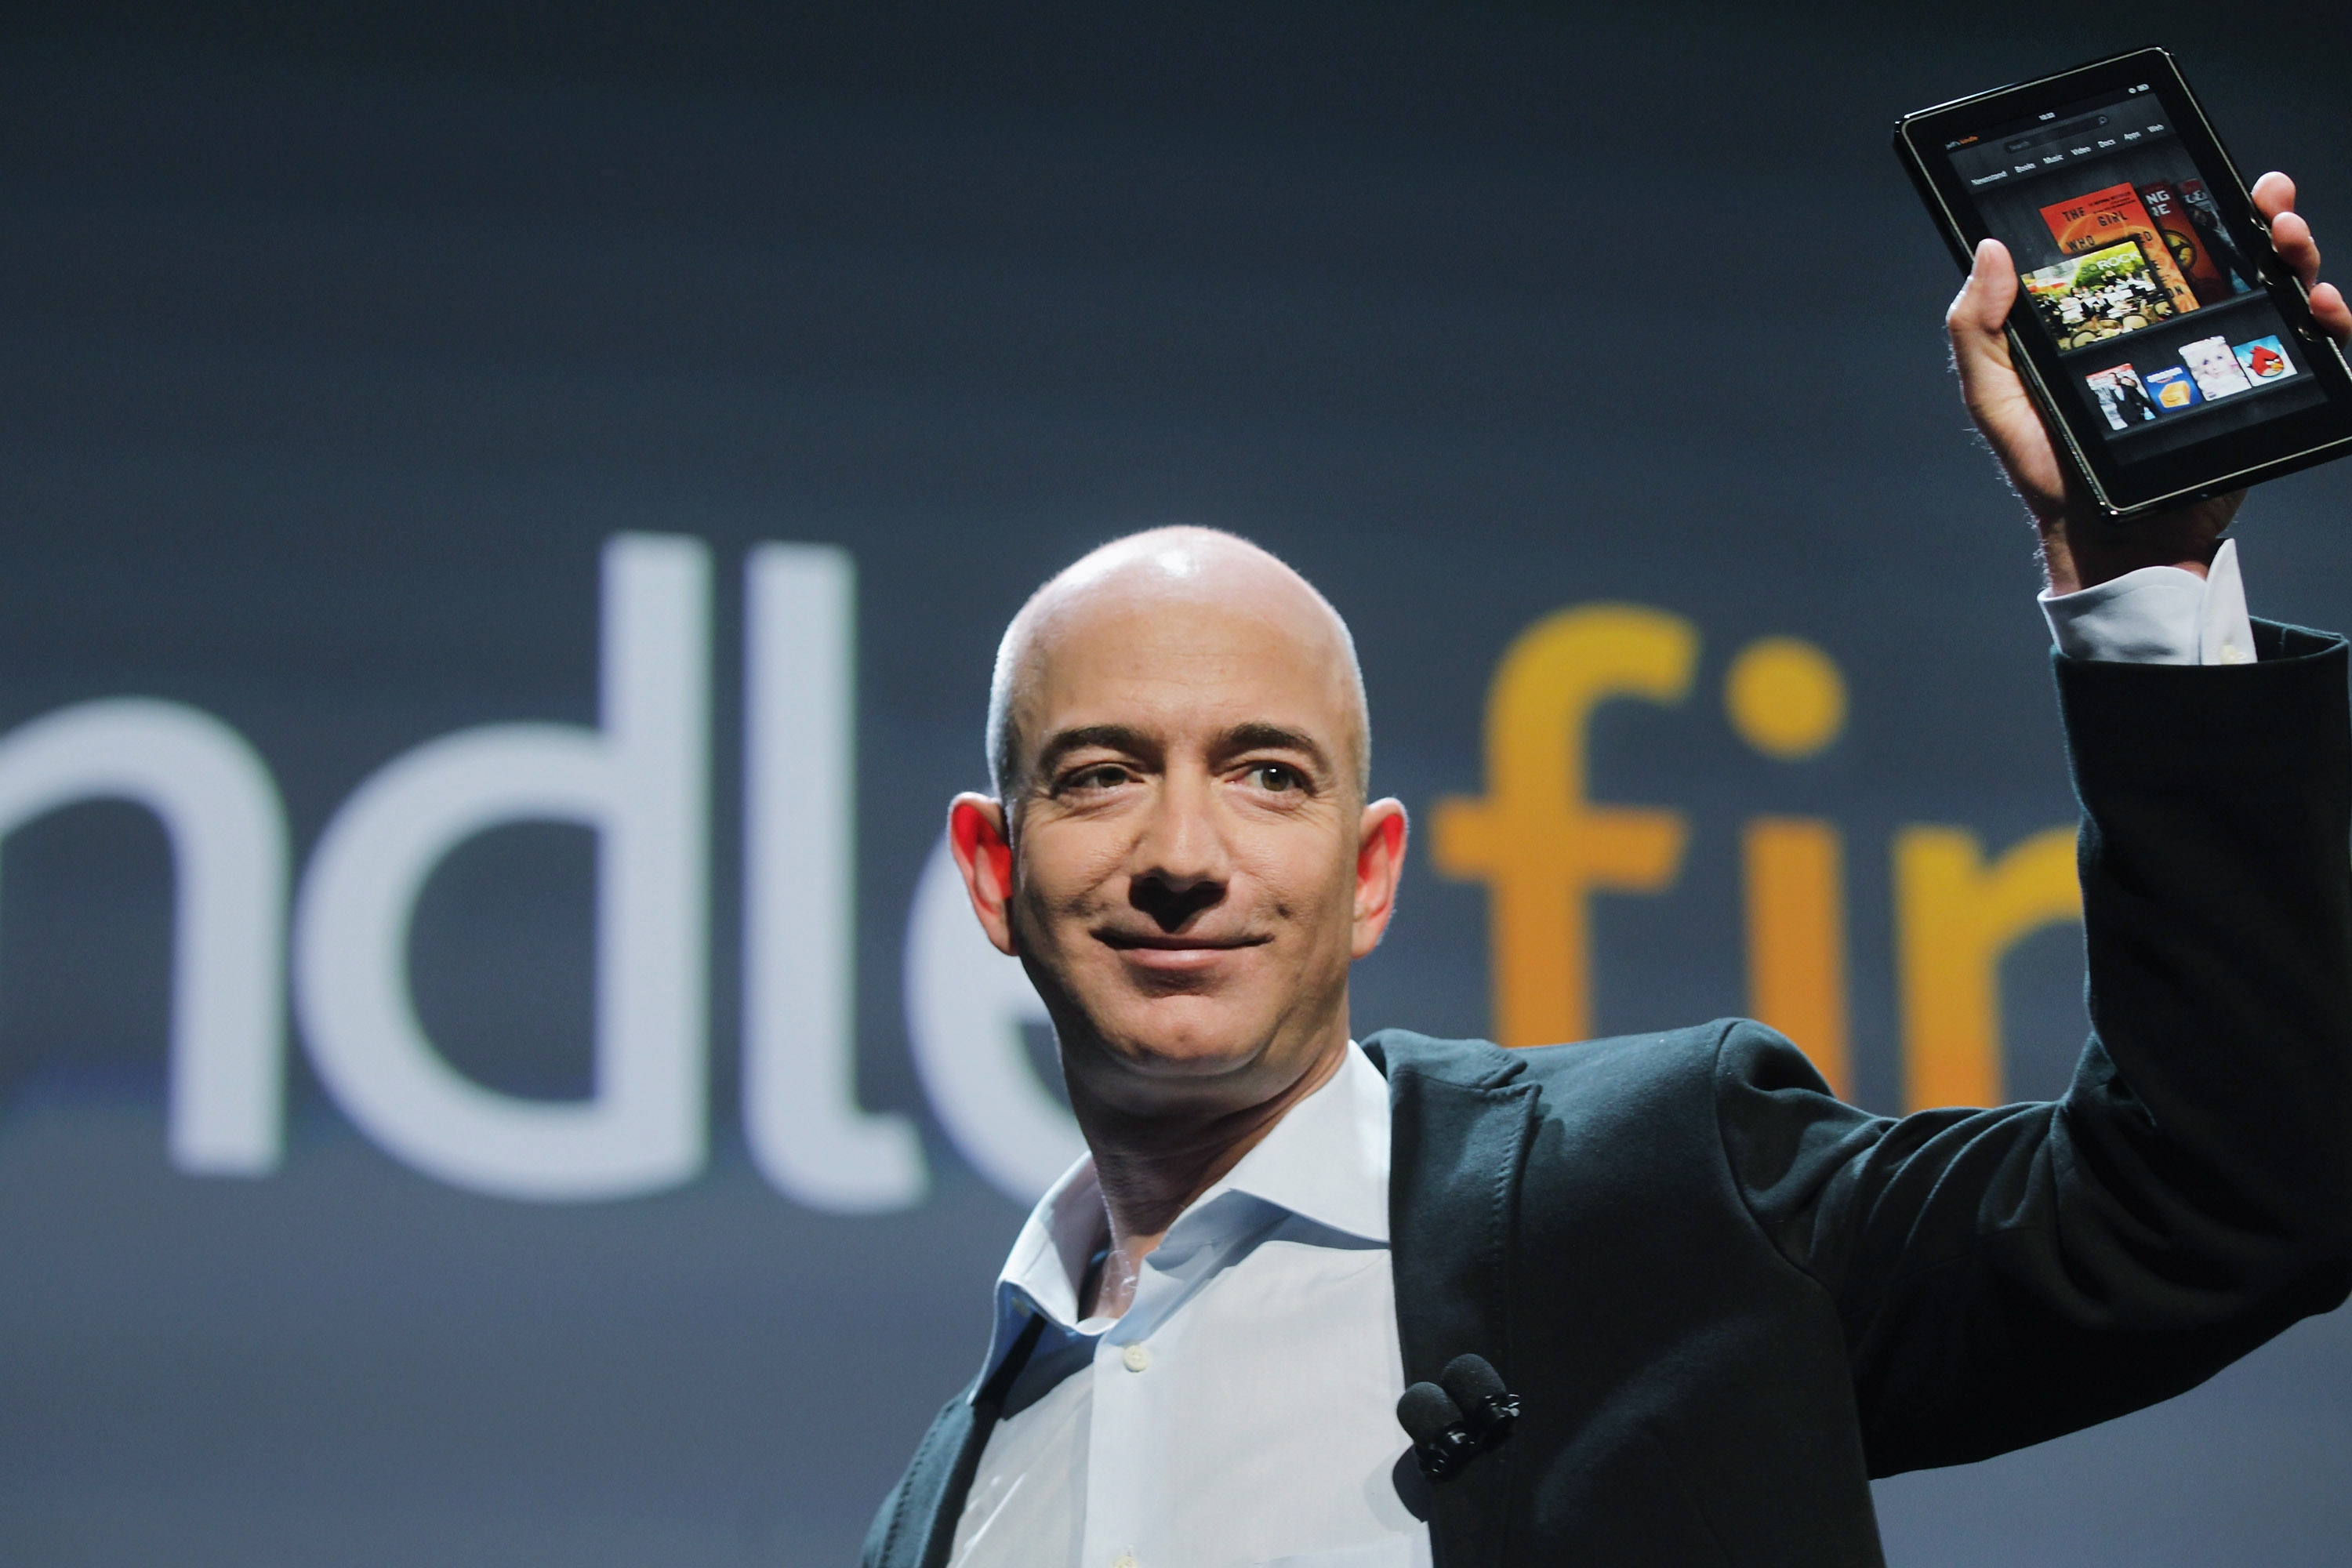 Amazon founder Jeff Bezos holds the new Amazon tablet called the Kindle Fire on September 28, 2011 in New York City. (Spencer Platt&mdash;Getty Images)